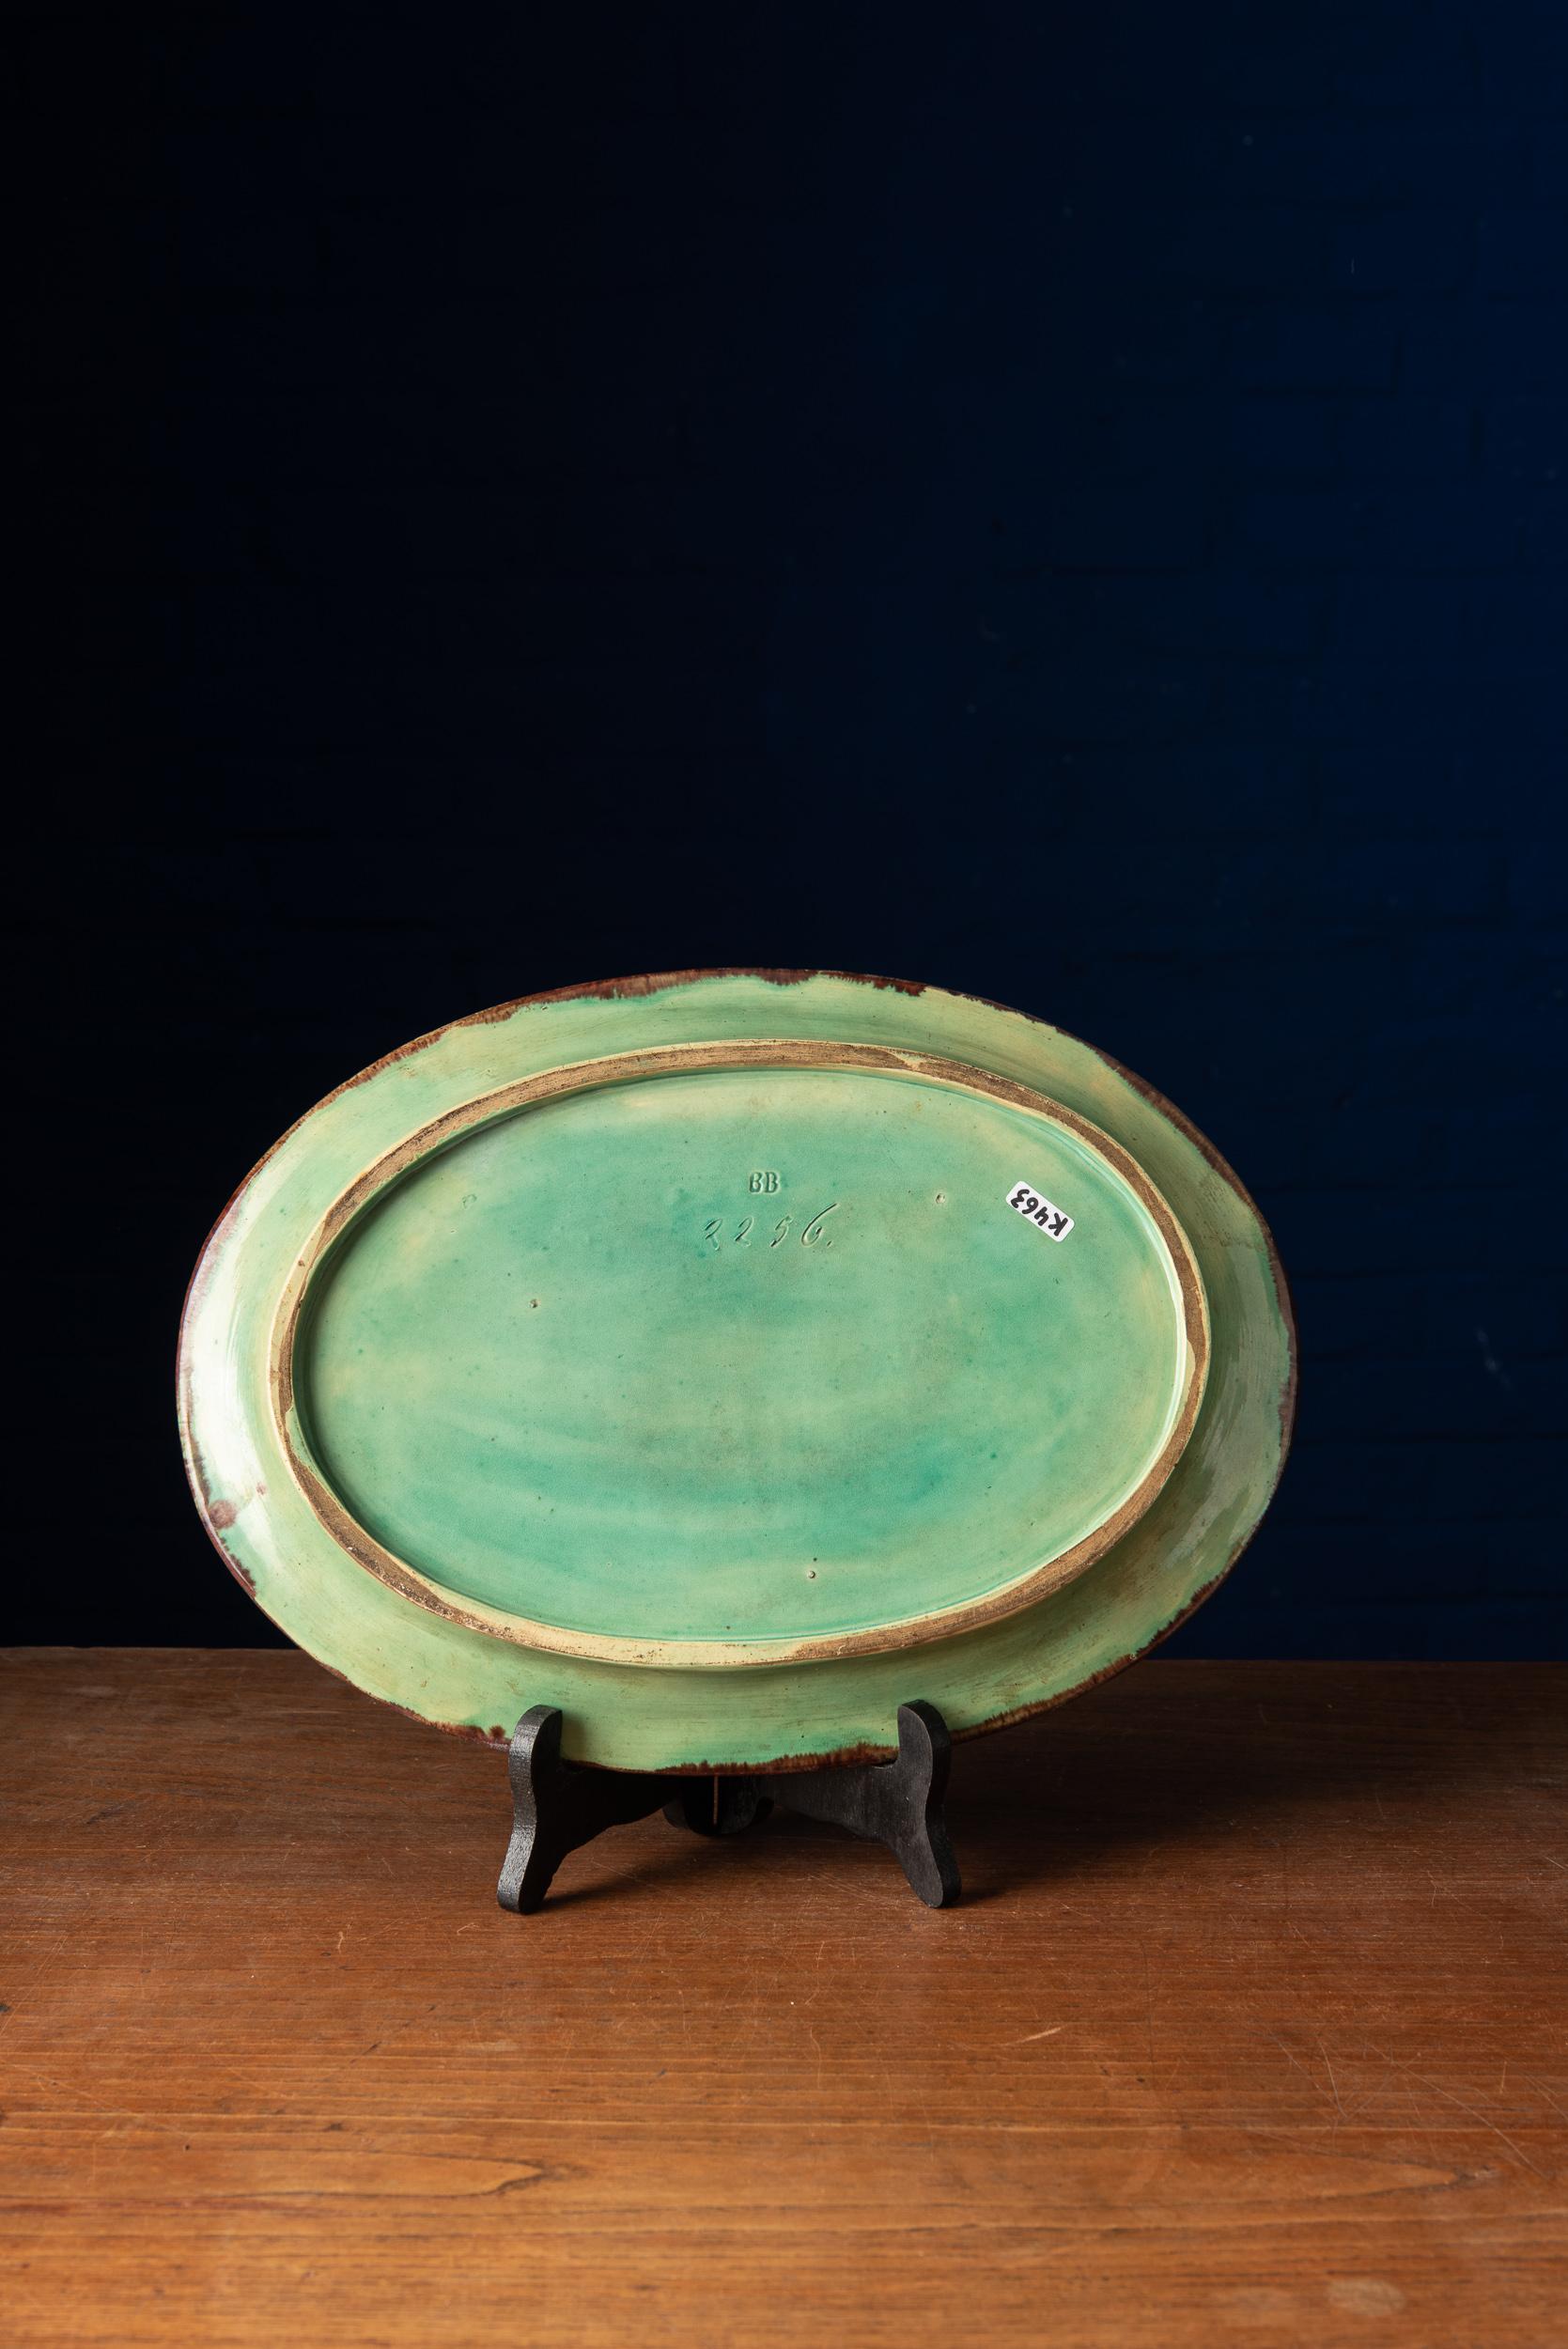 Lovely ceramic plate with hand painted shades of blue and green. This item displays elegant and charming features. A remarkable piece of art with a hand stamped tag on the bottom.